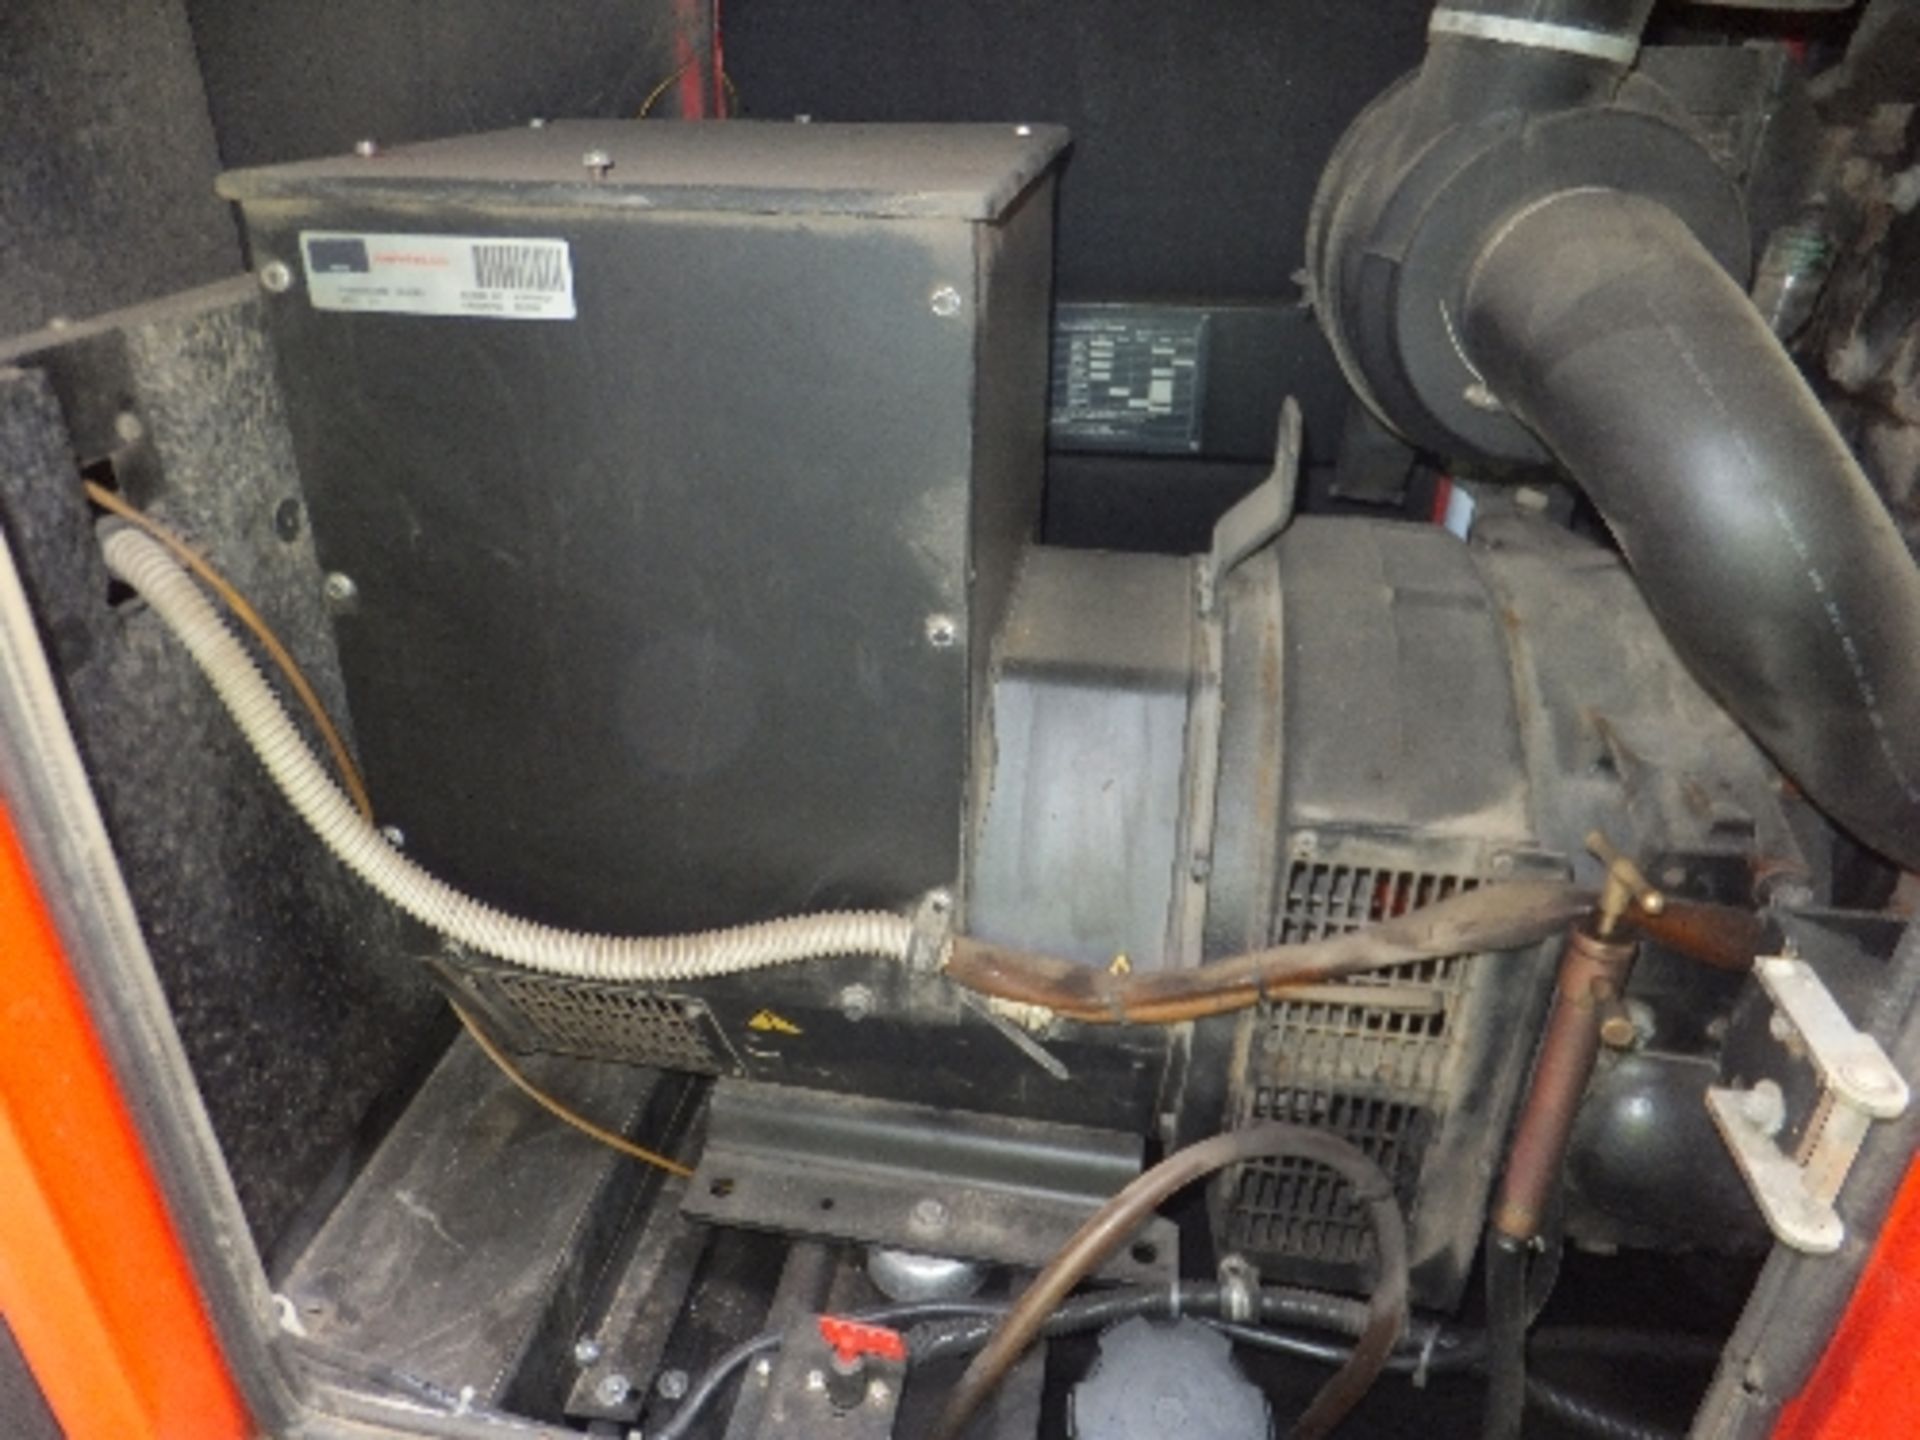 Genset MG70SSP generator - electricalstop fault - 33611 hrs This lot is sold on instruction of - Image 3 of 5